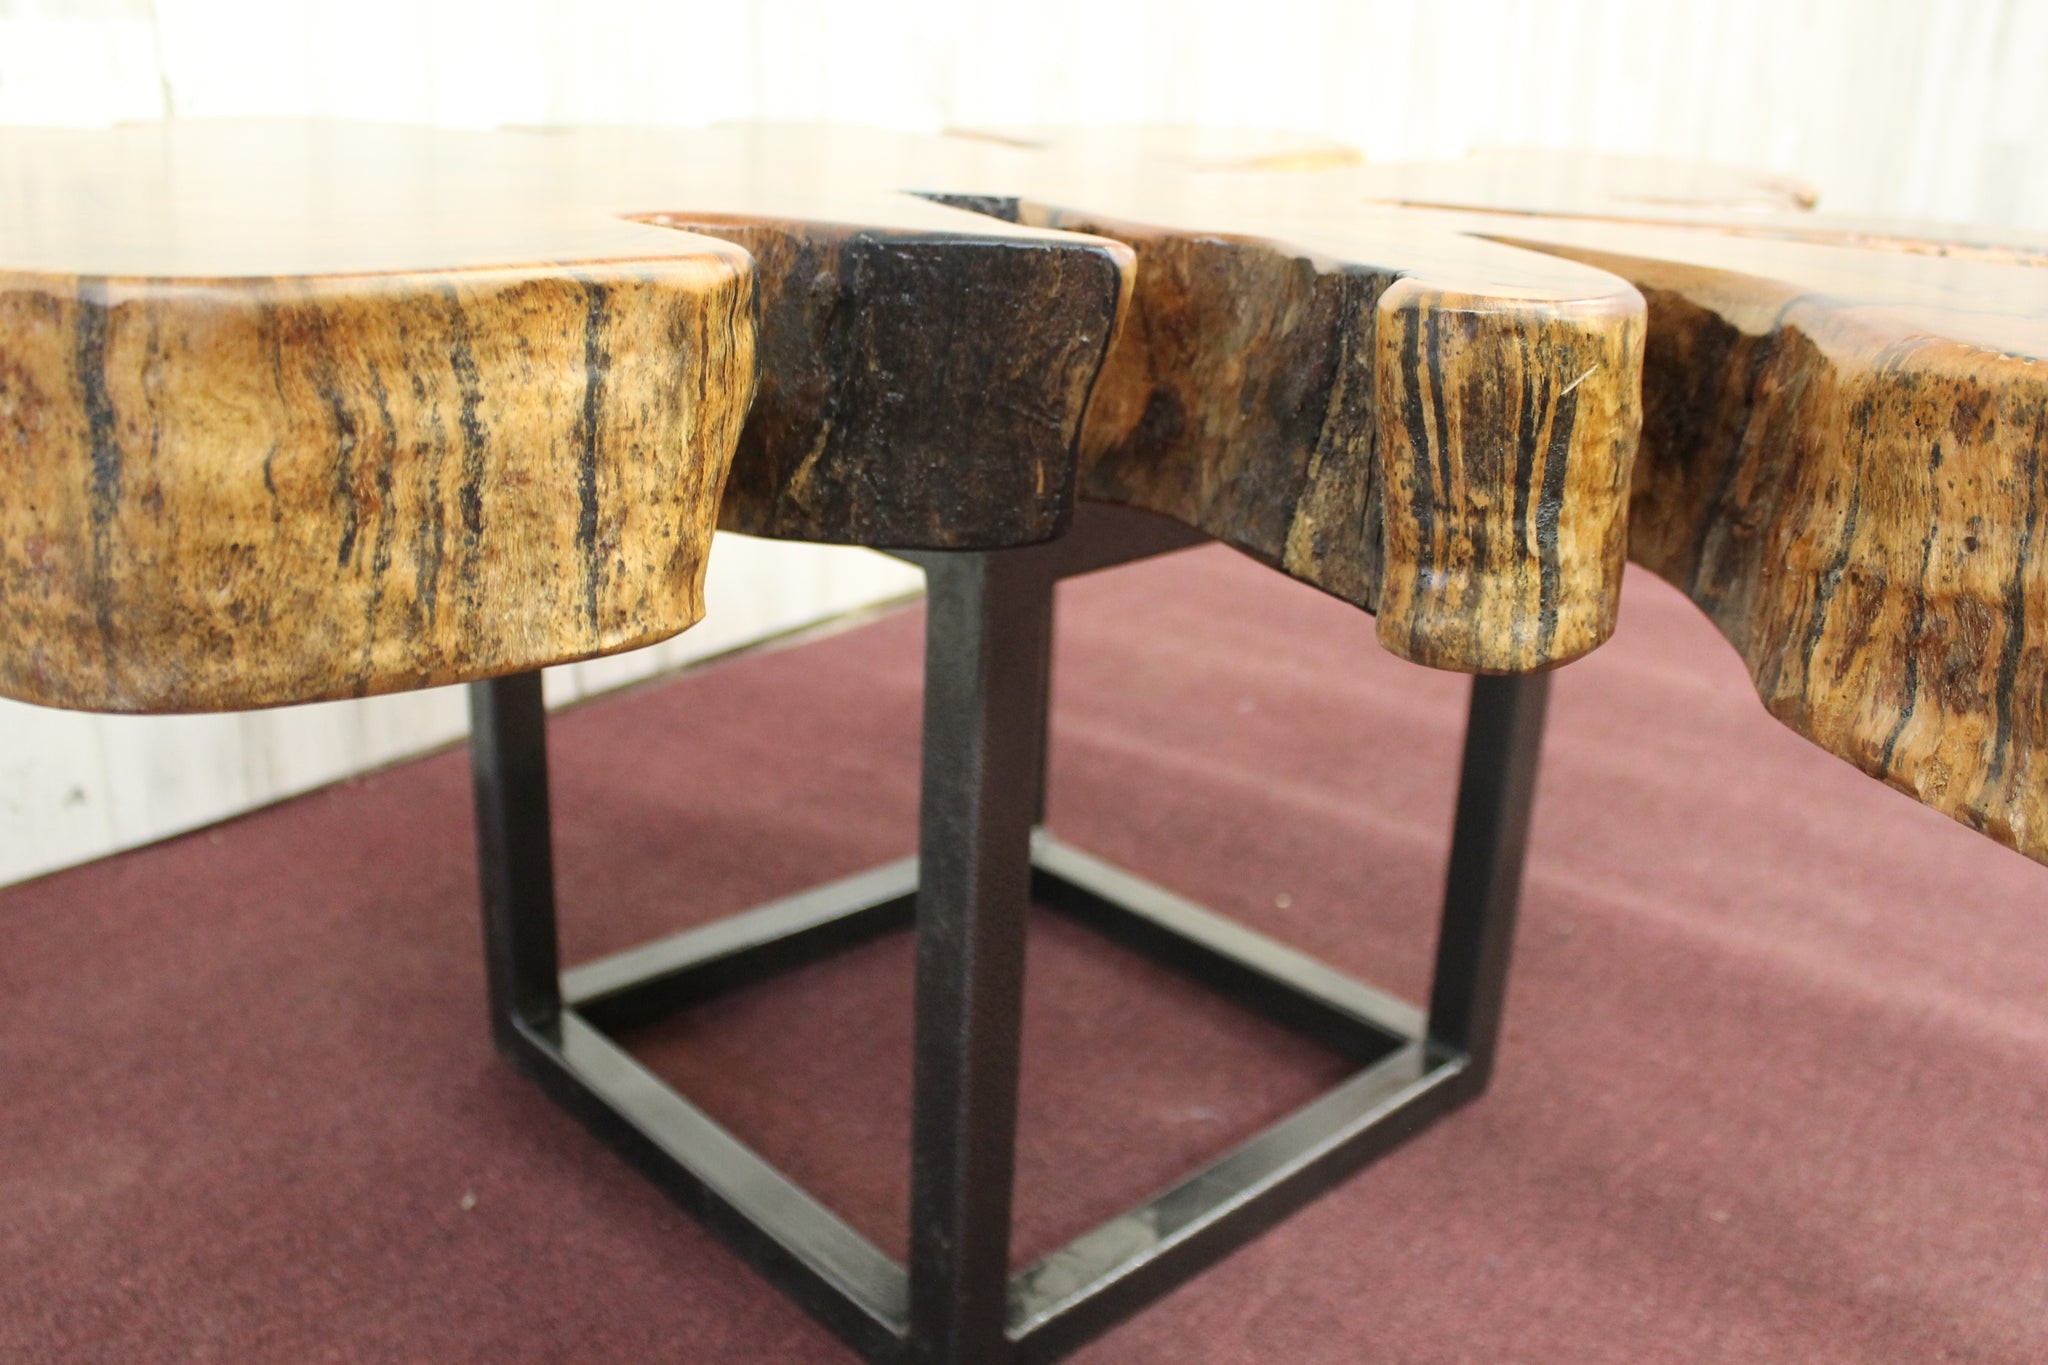 African Teak Coffee table with Square Tubing - #20